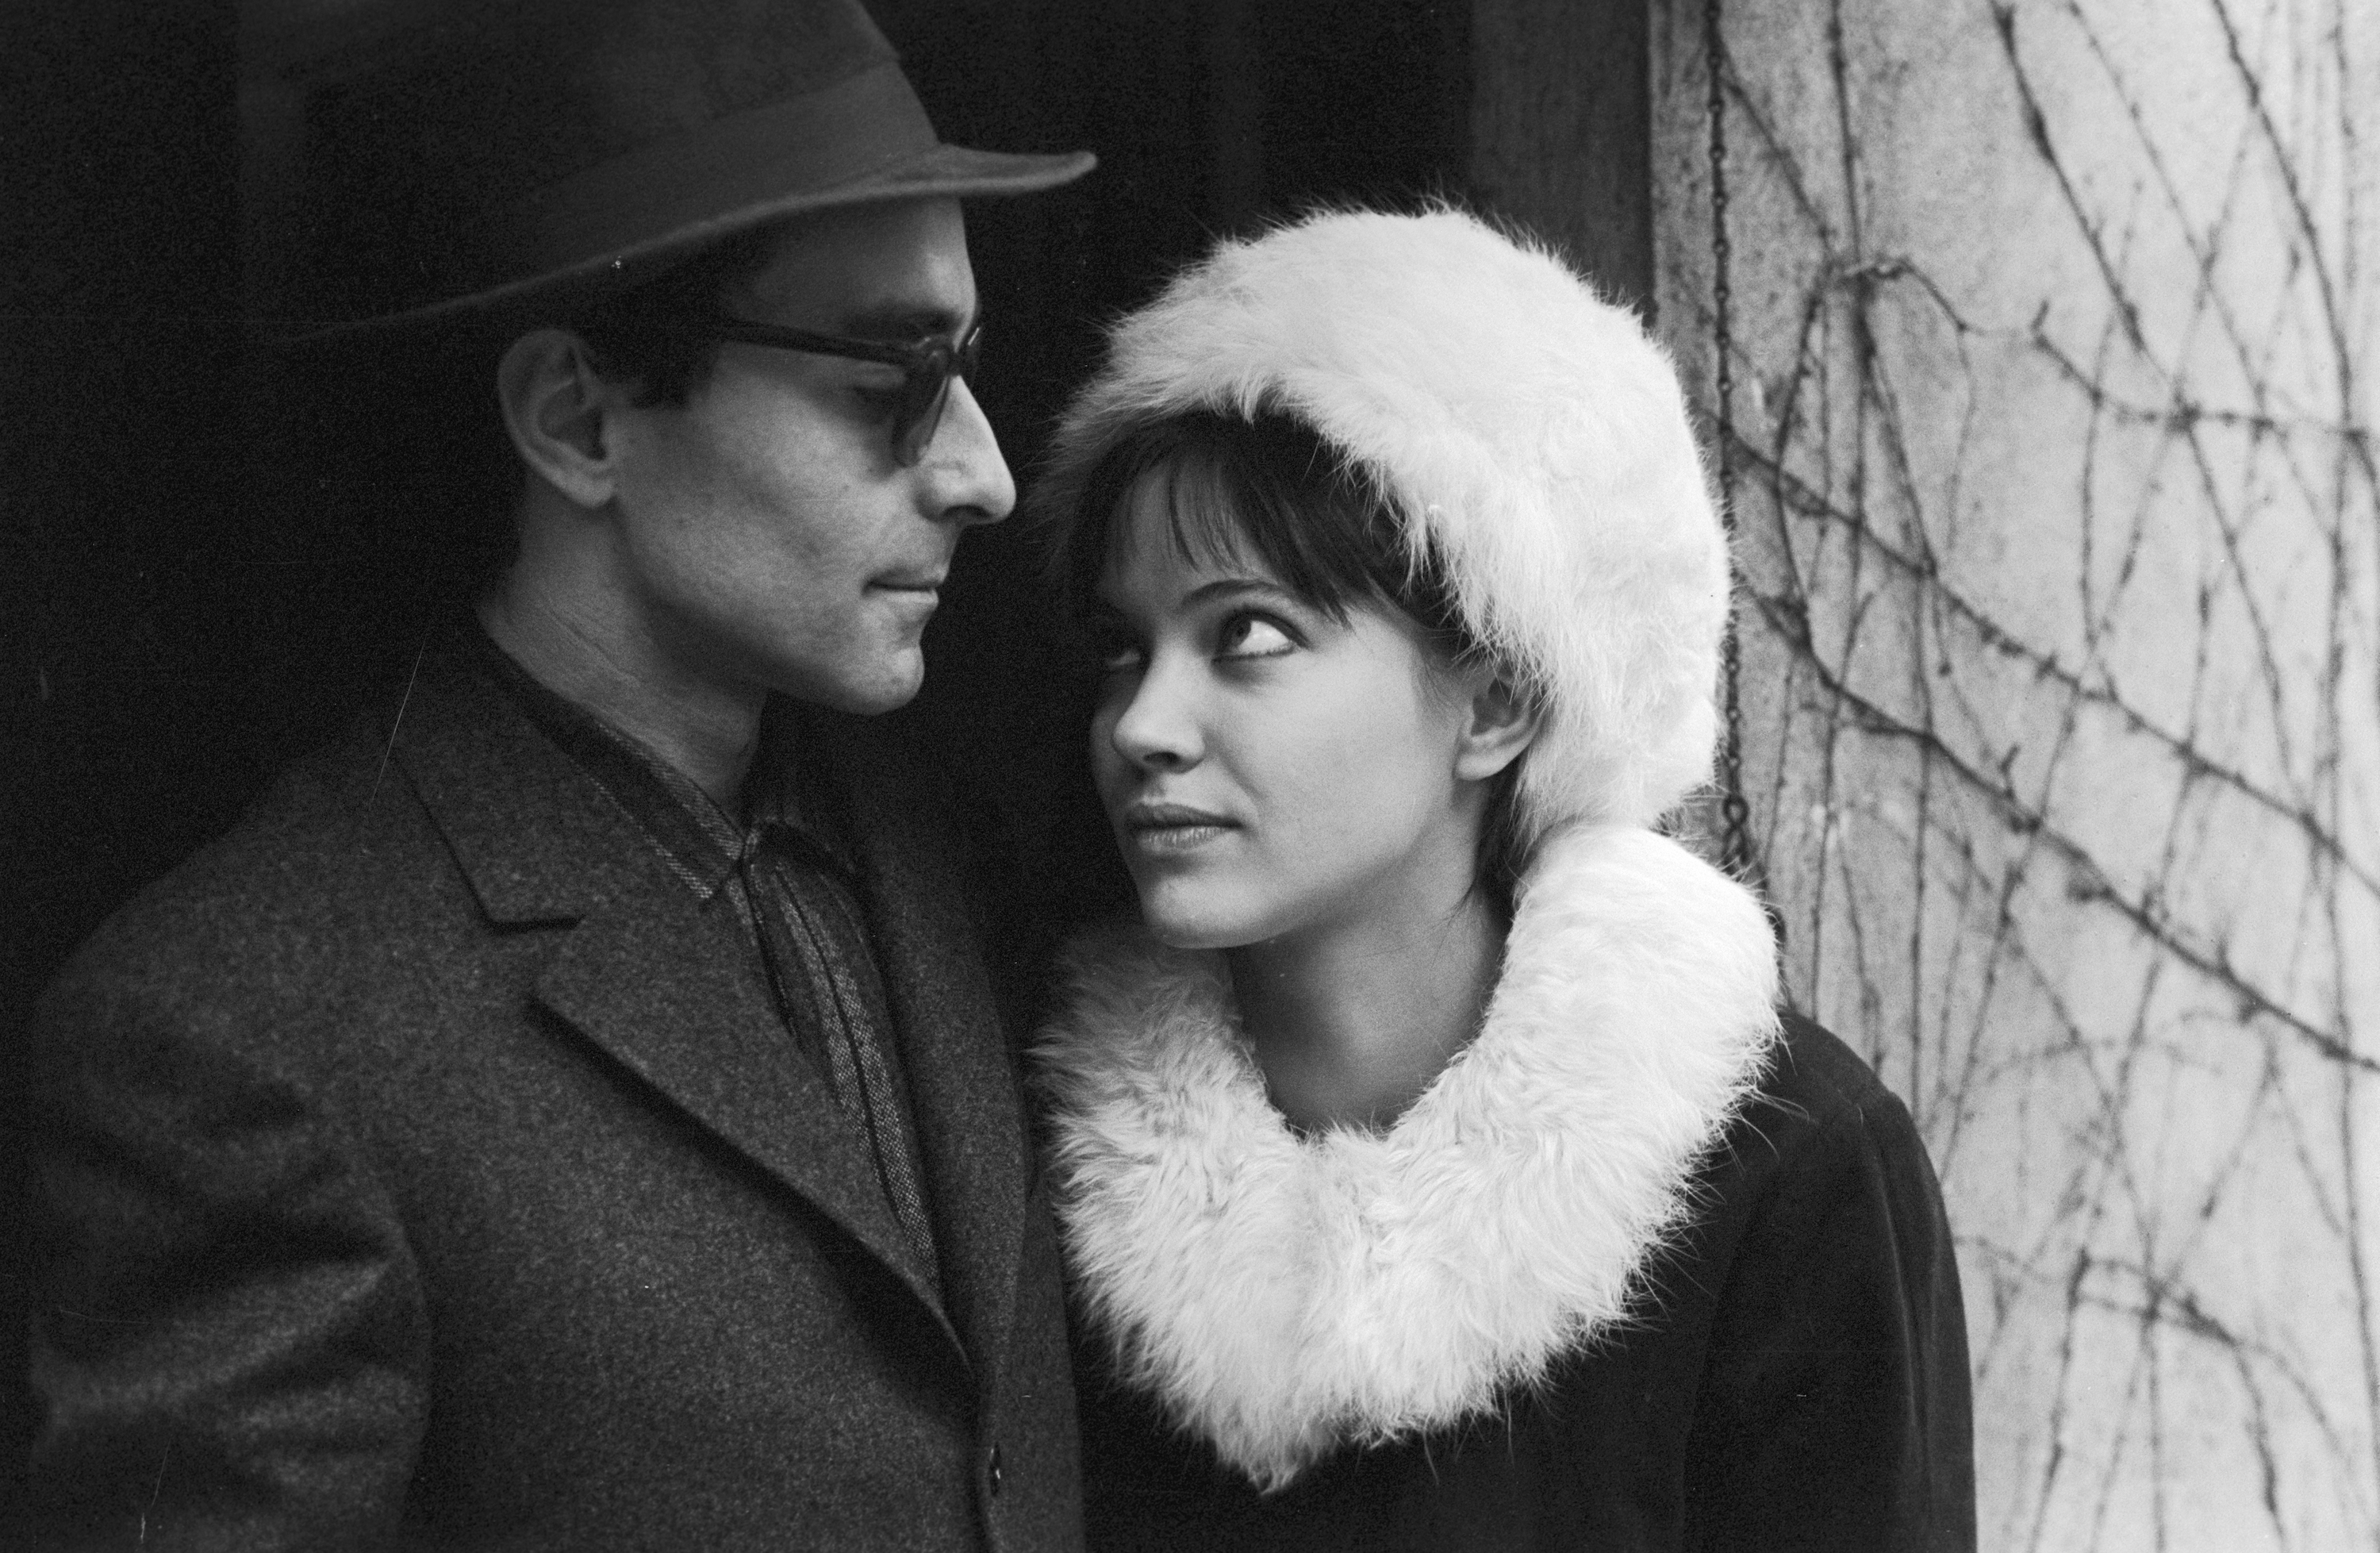 anna karina looking up at jean-luc godard while wearing a fur trimmed coat and hat